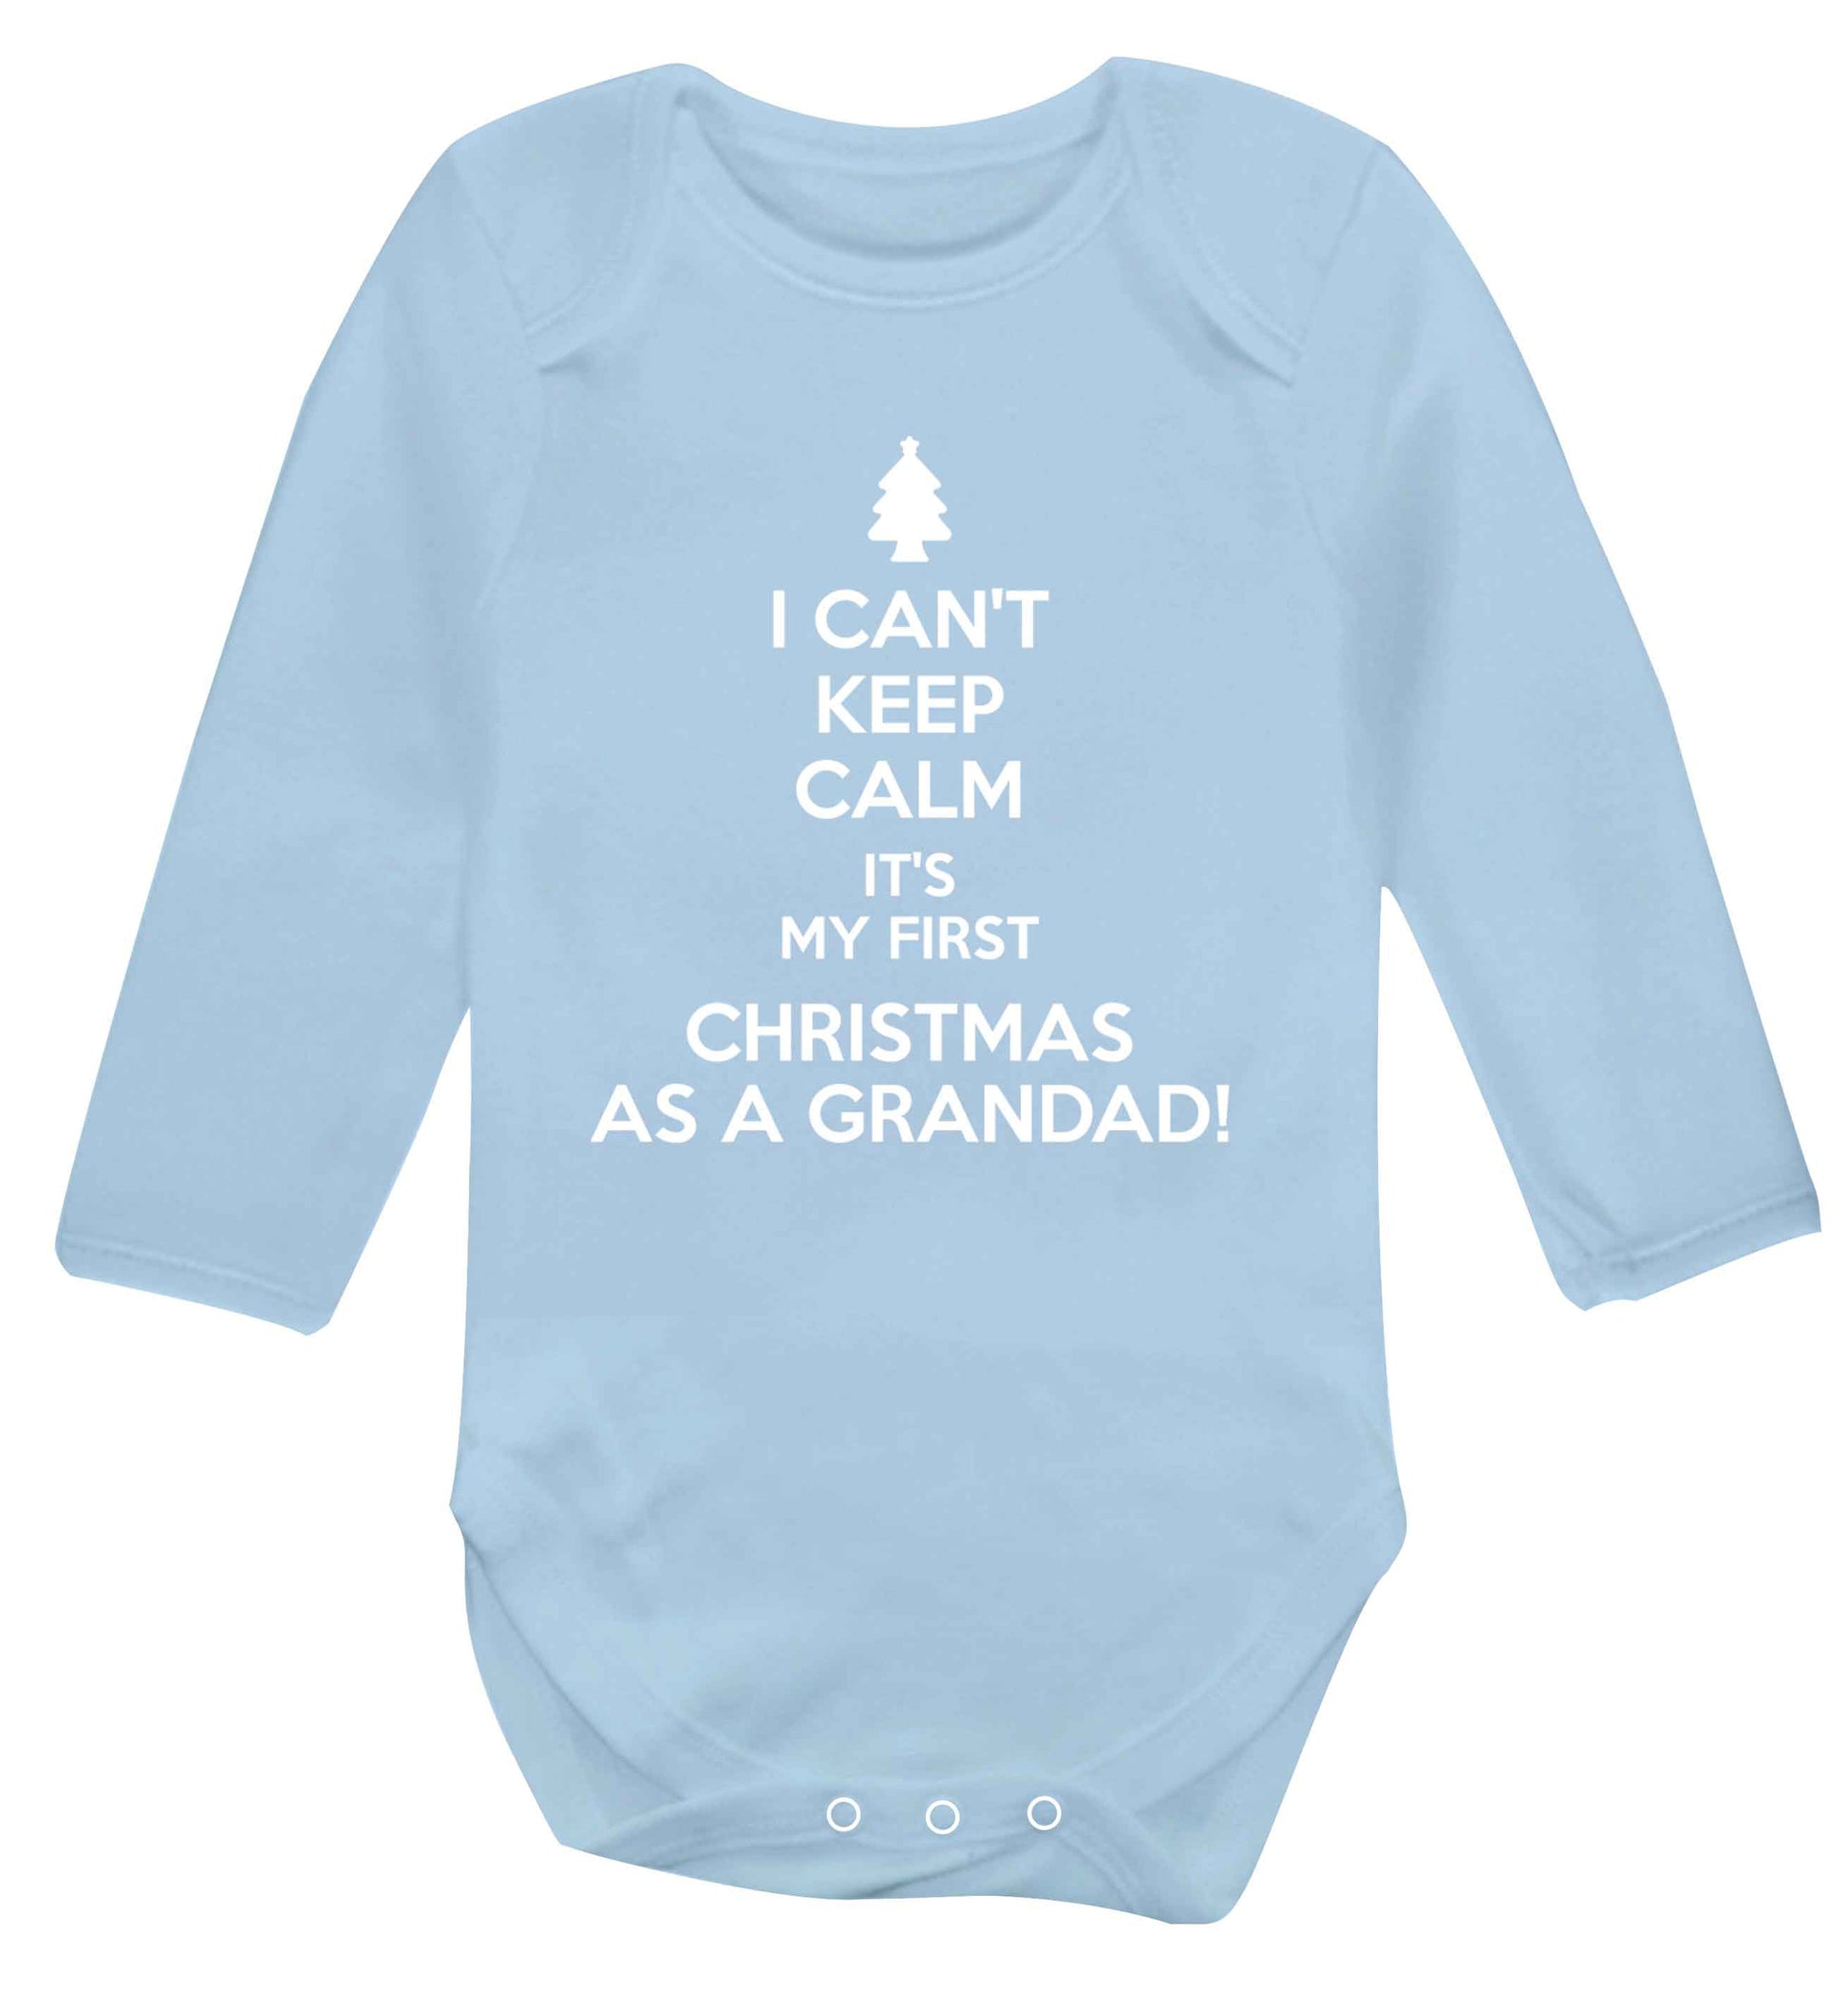 I can't keep calm it's my first Christmas as a grandad! Baby Vest long sleeved pale blue 6-12 months